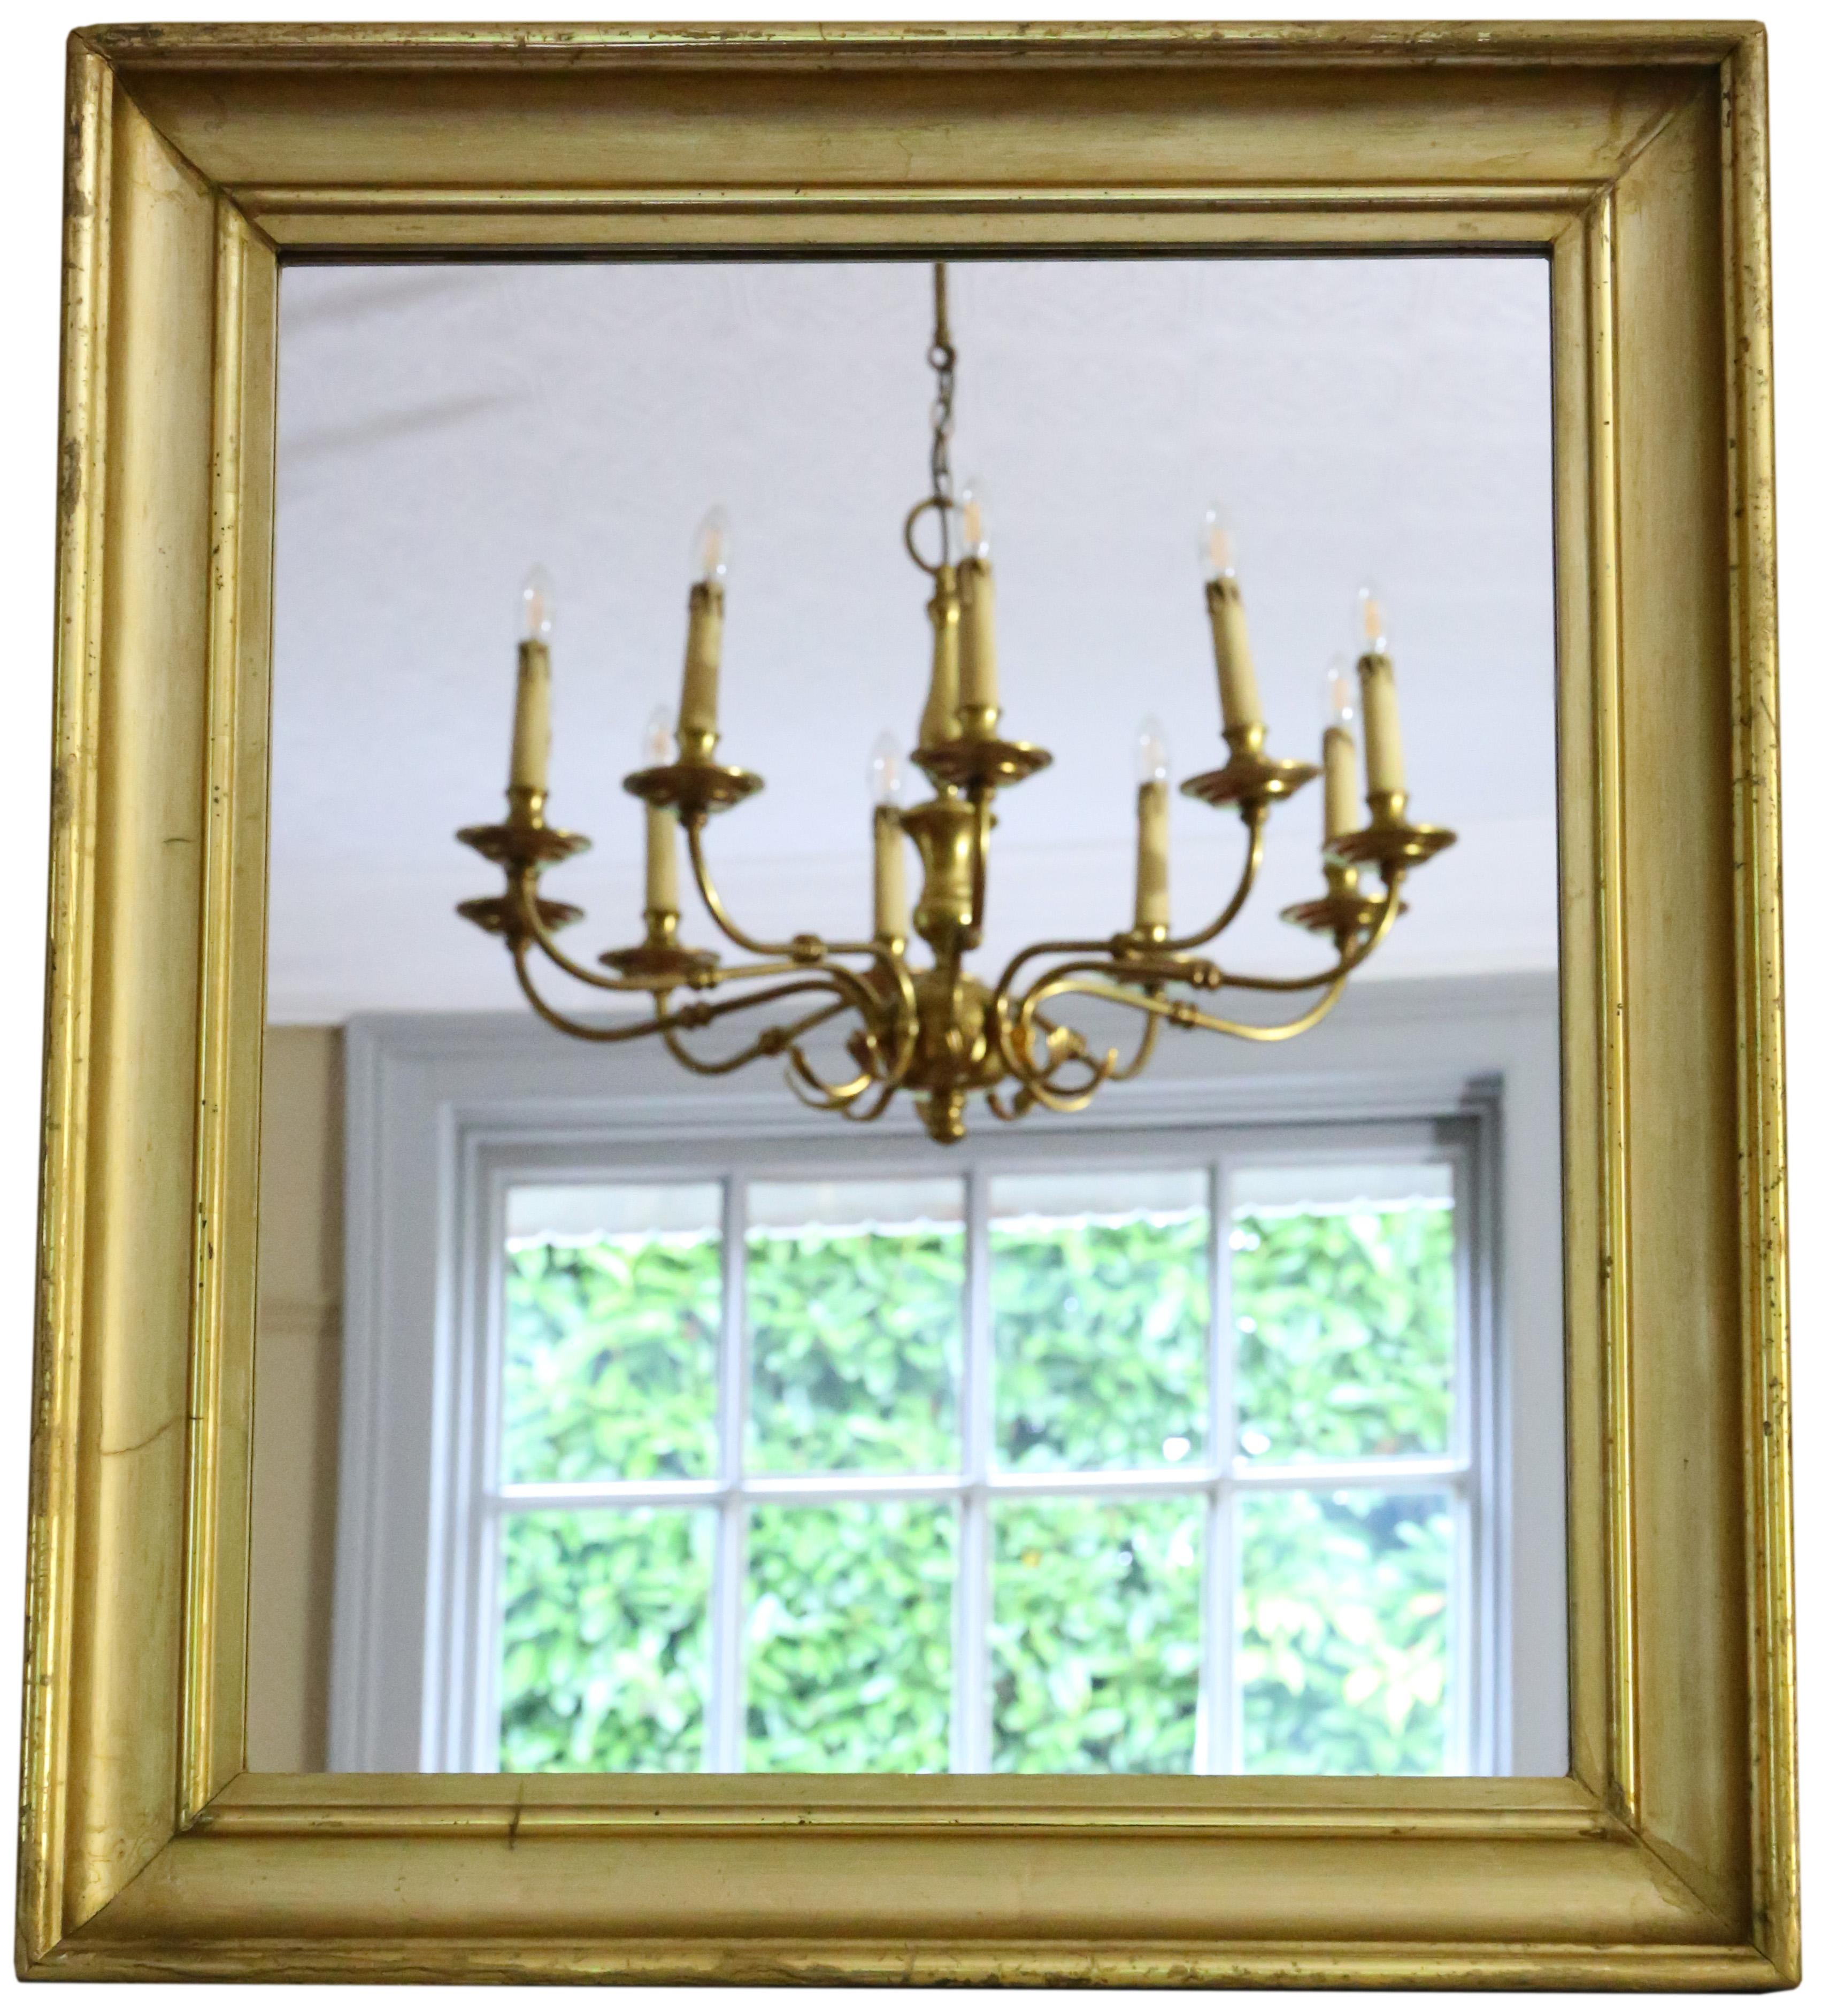 Antique C1900 large quality gilt overmantle wall mirror. Lovely charm and elegance.

This is a lovely, rare mirror. A bit different and quite special.

An impressive find, that would look amazing in the right location. No loose joints or